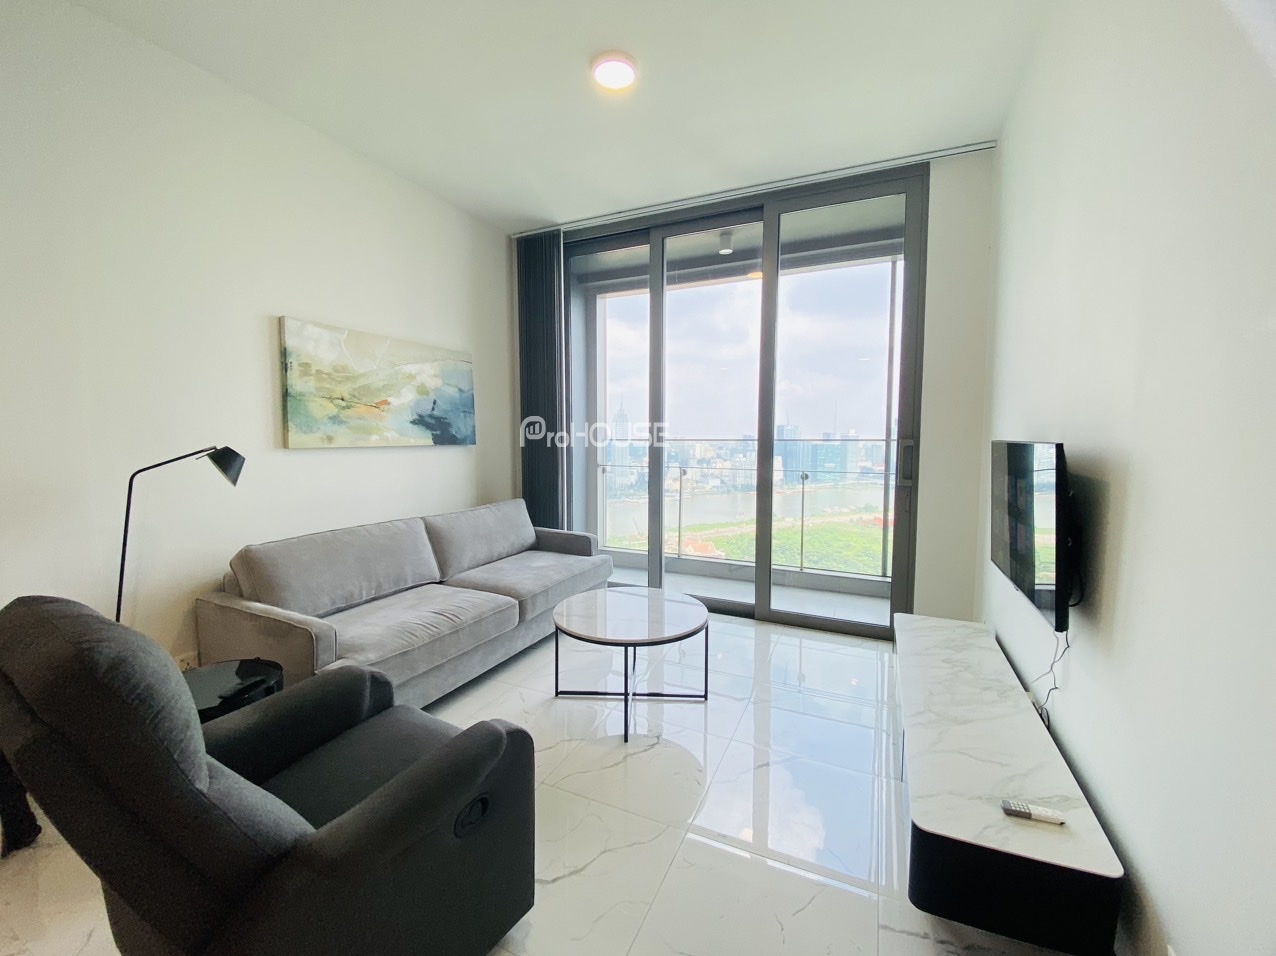 Nice view apartment for rent in Empire City with modern design and full amenities